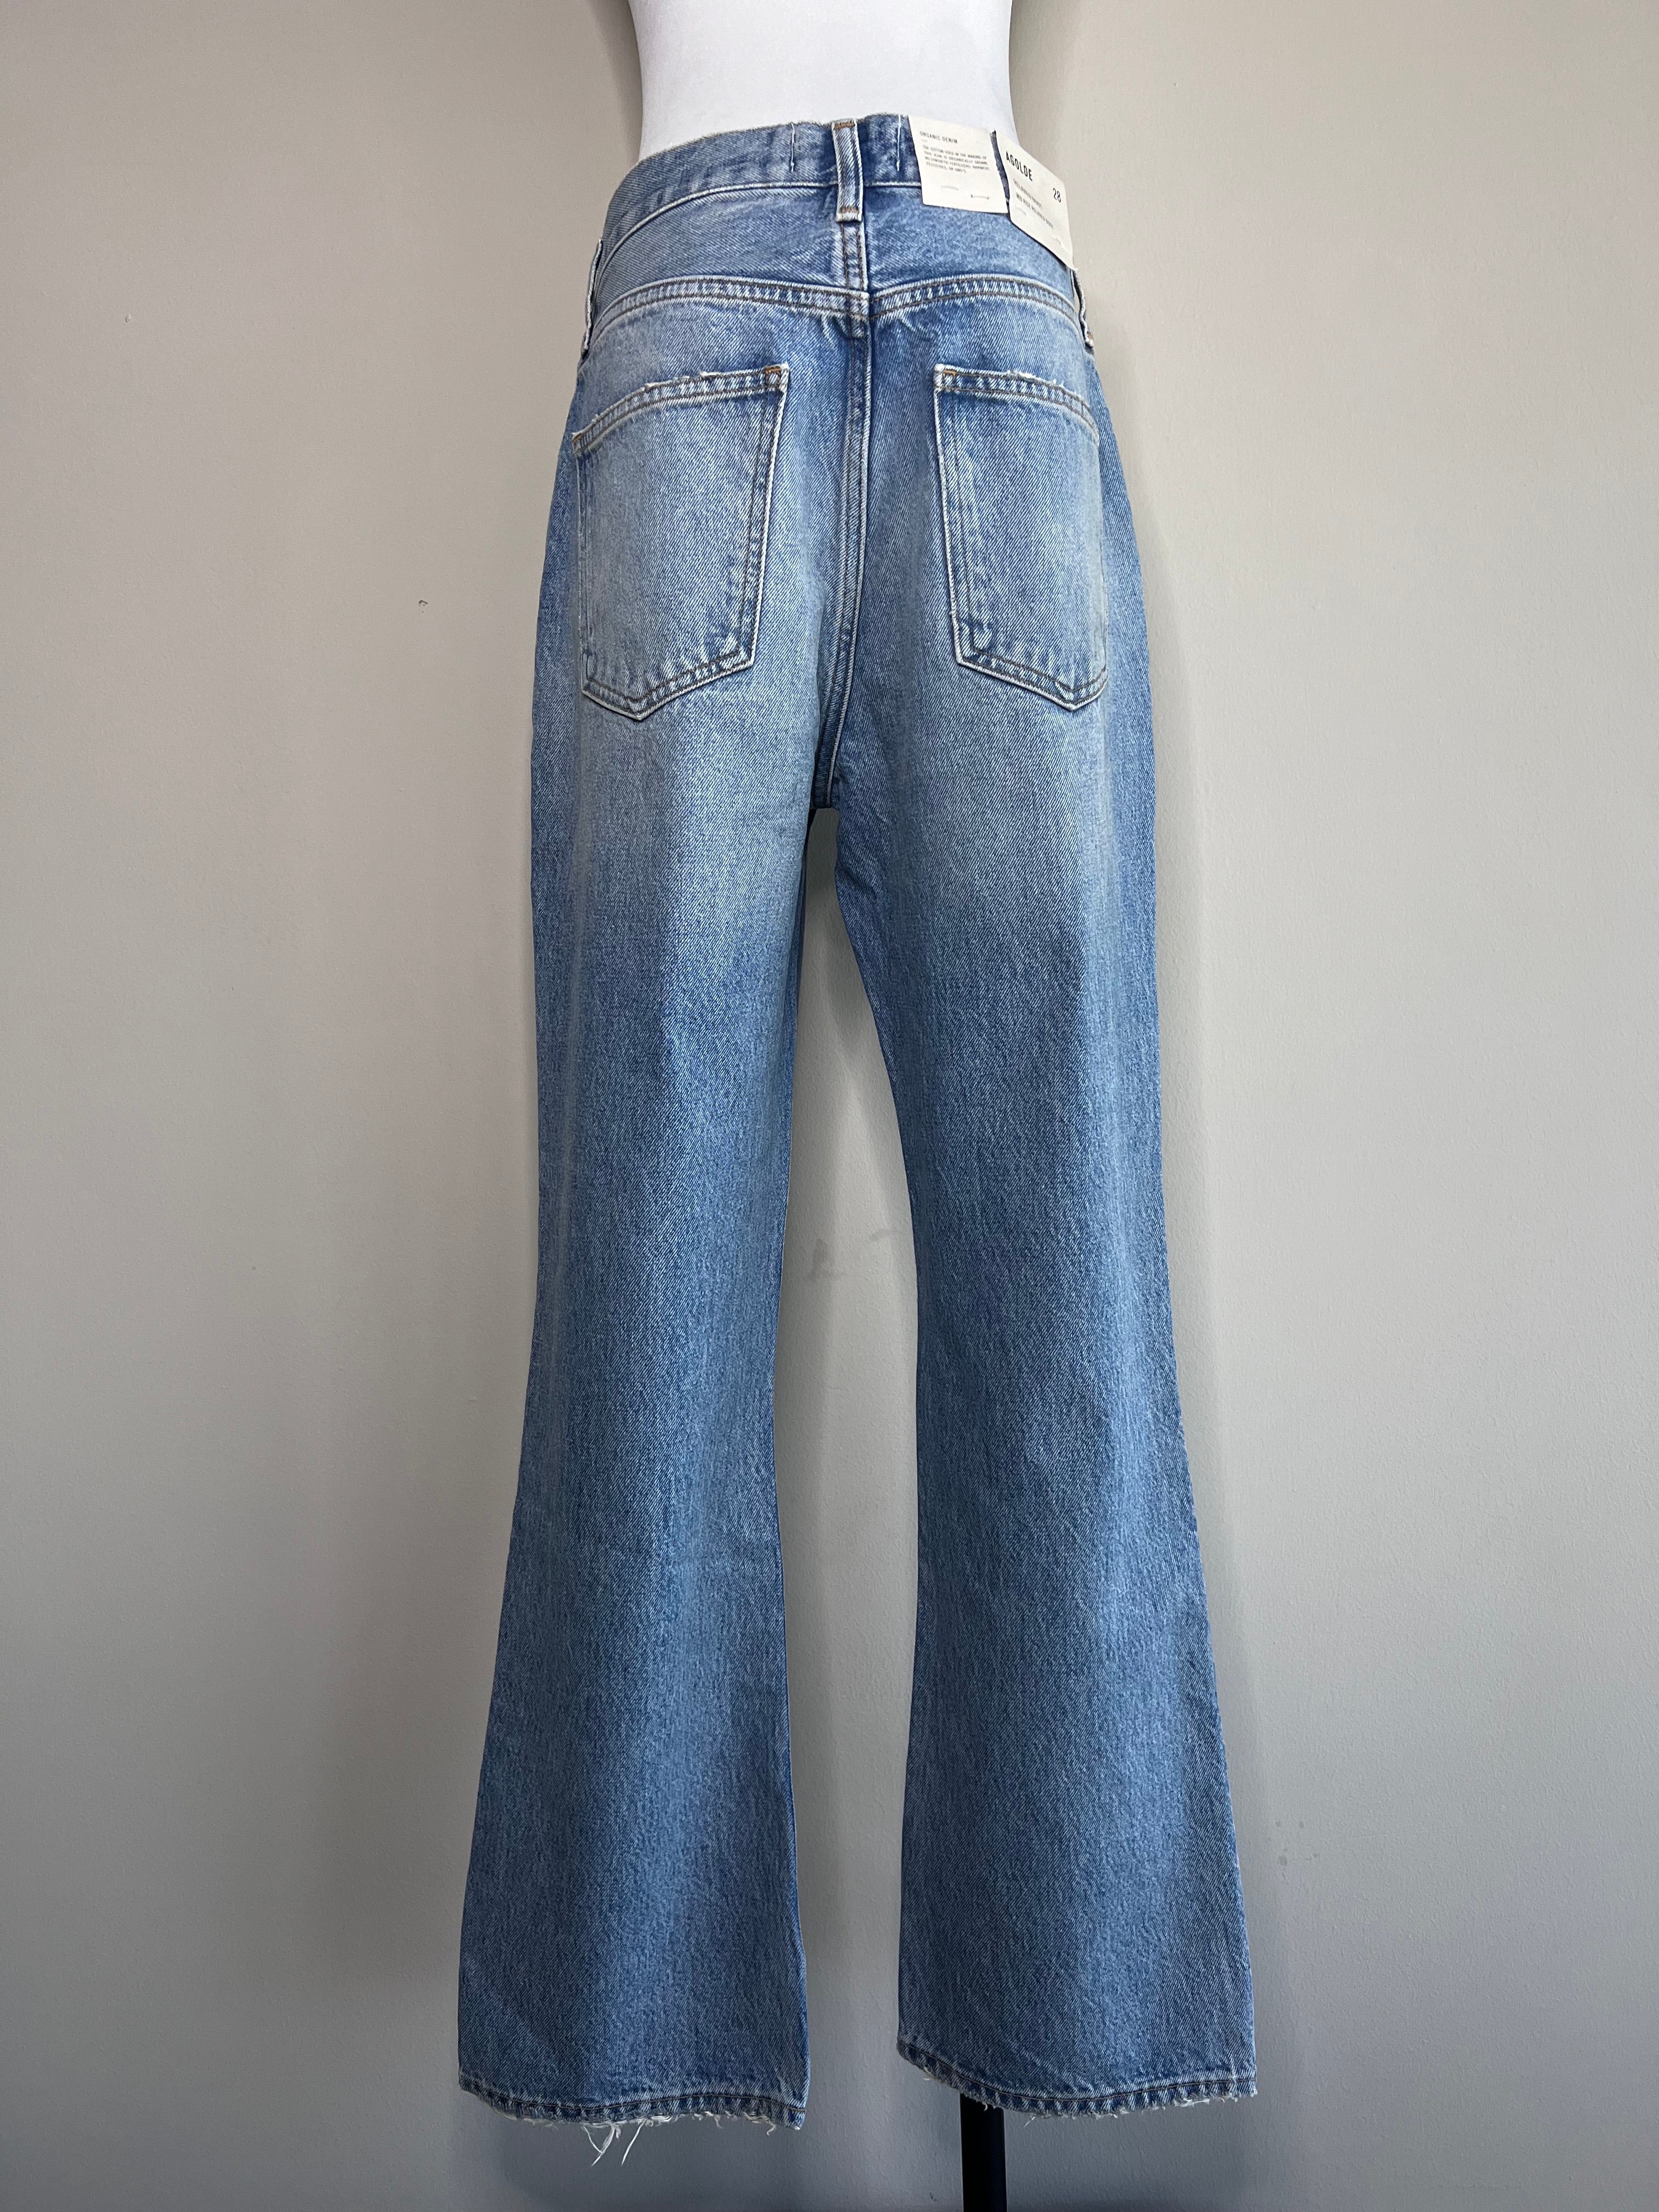 BRAND NEW! Blue relaxed boot mid-rise jeans - AGOLDE